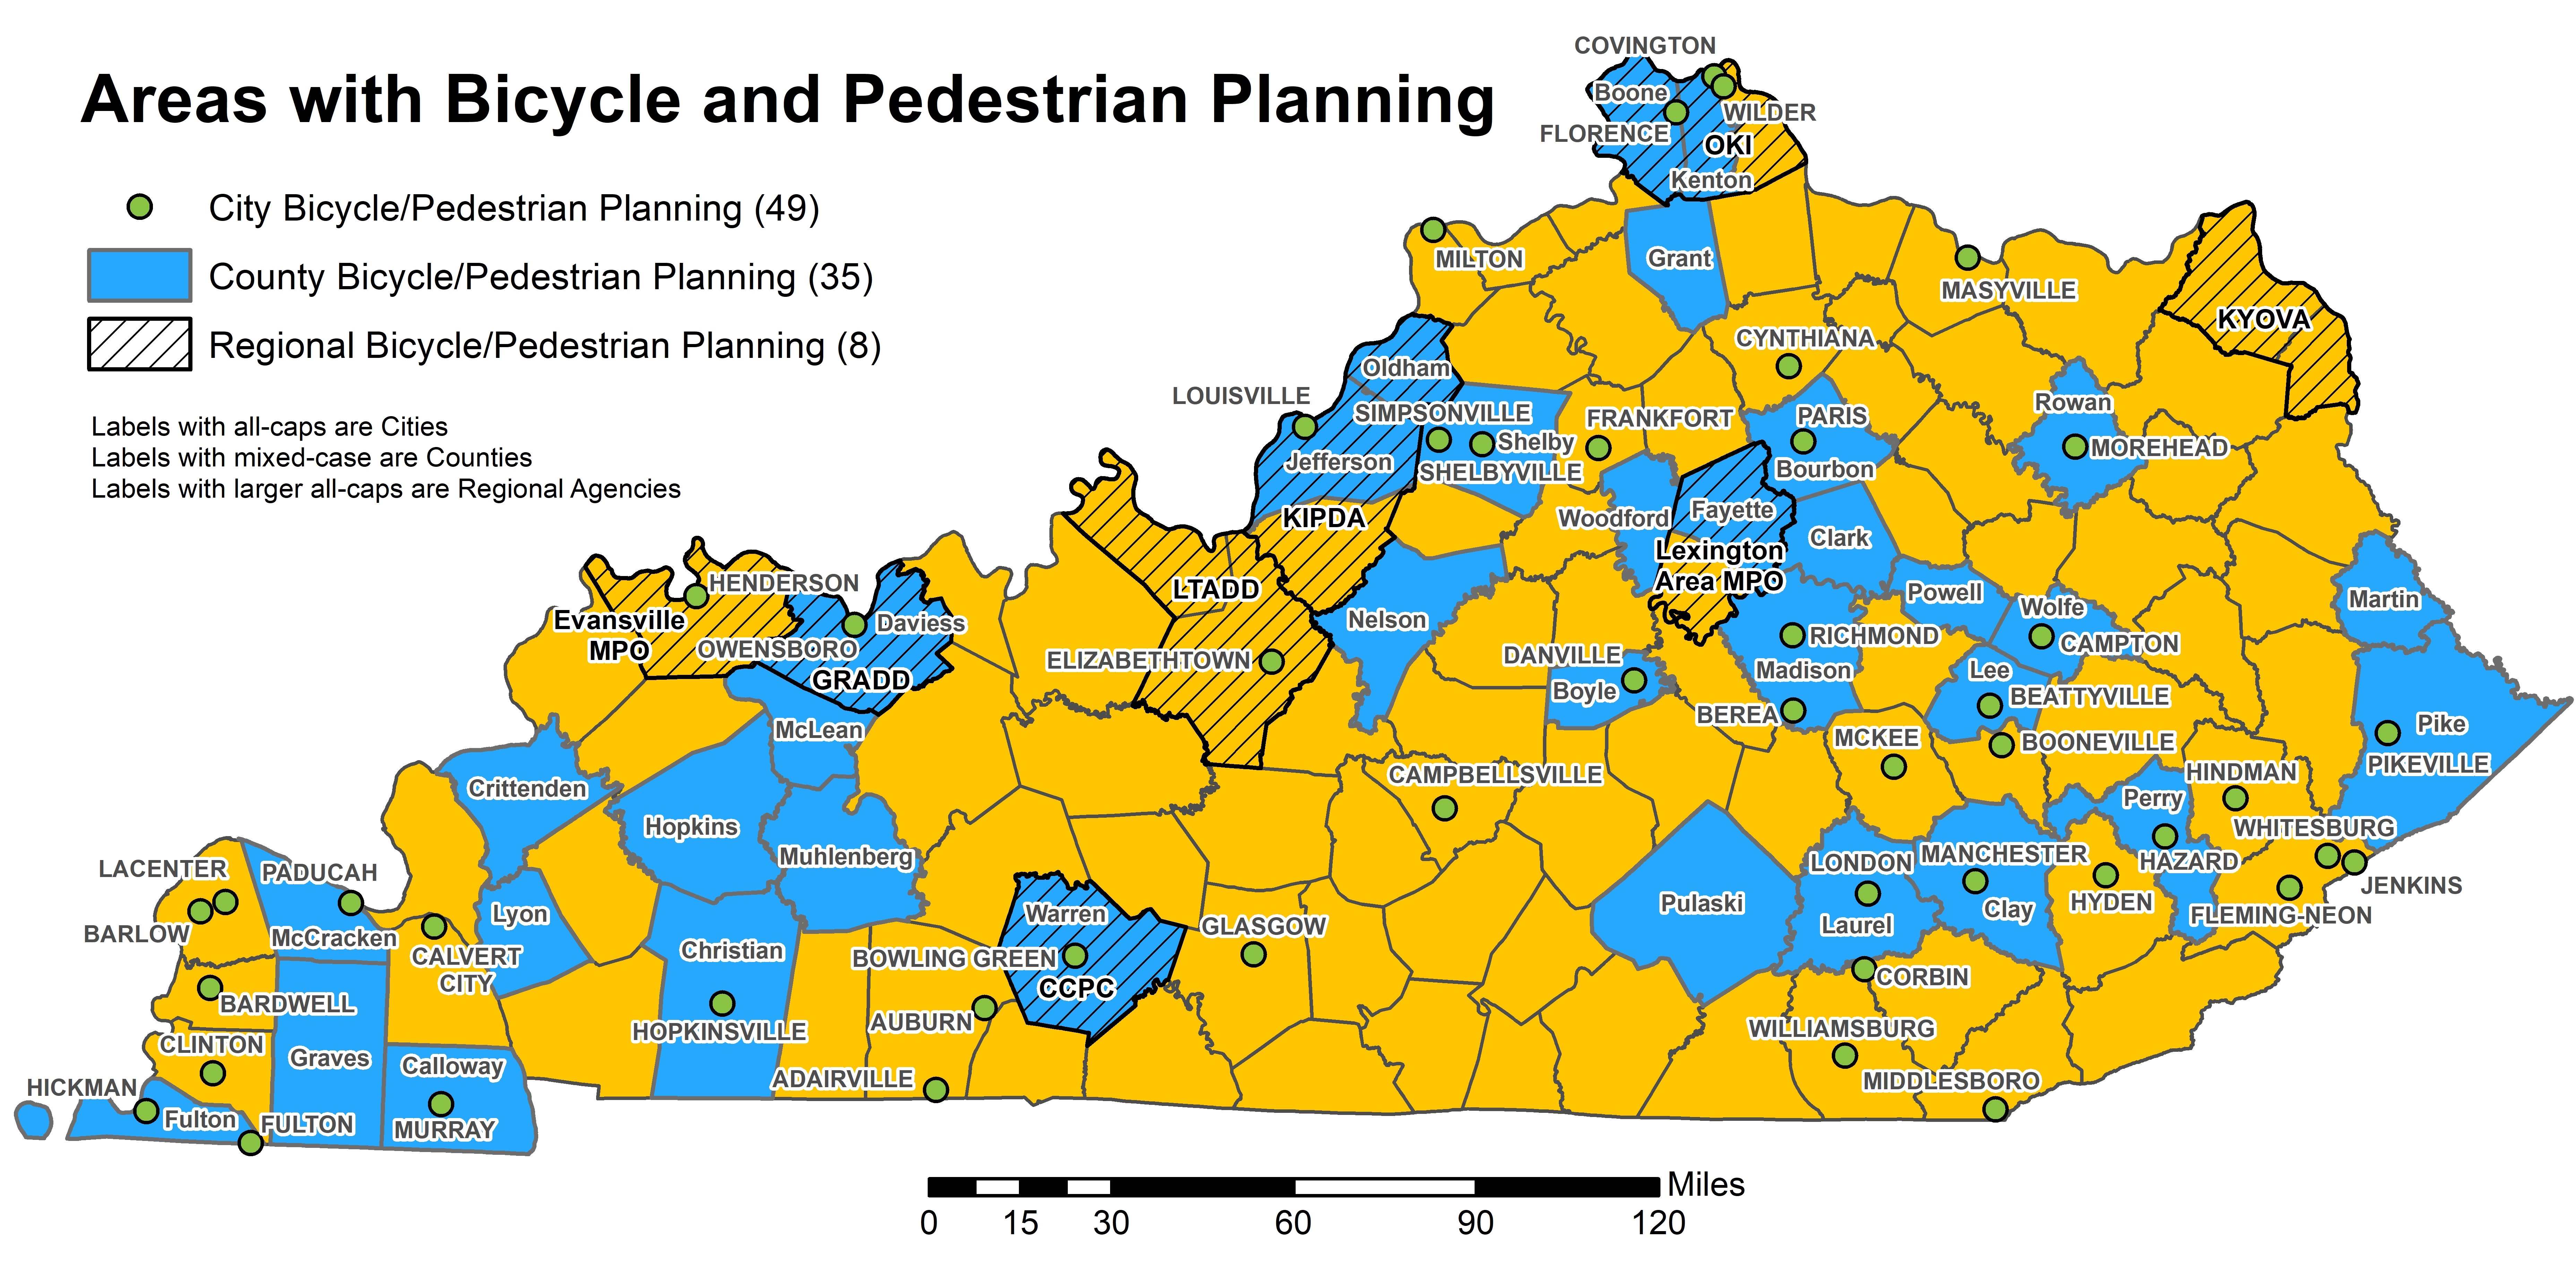 Statewide map of Kentucky depicting locations of communities and regions that have bicycle and pedestrian planning agencies